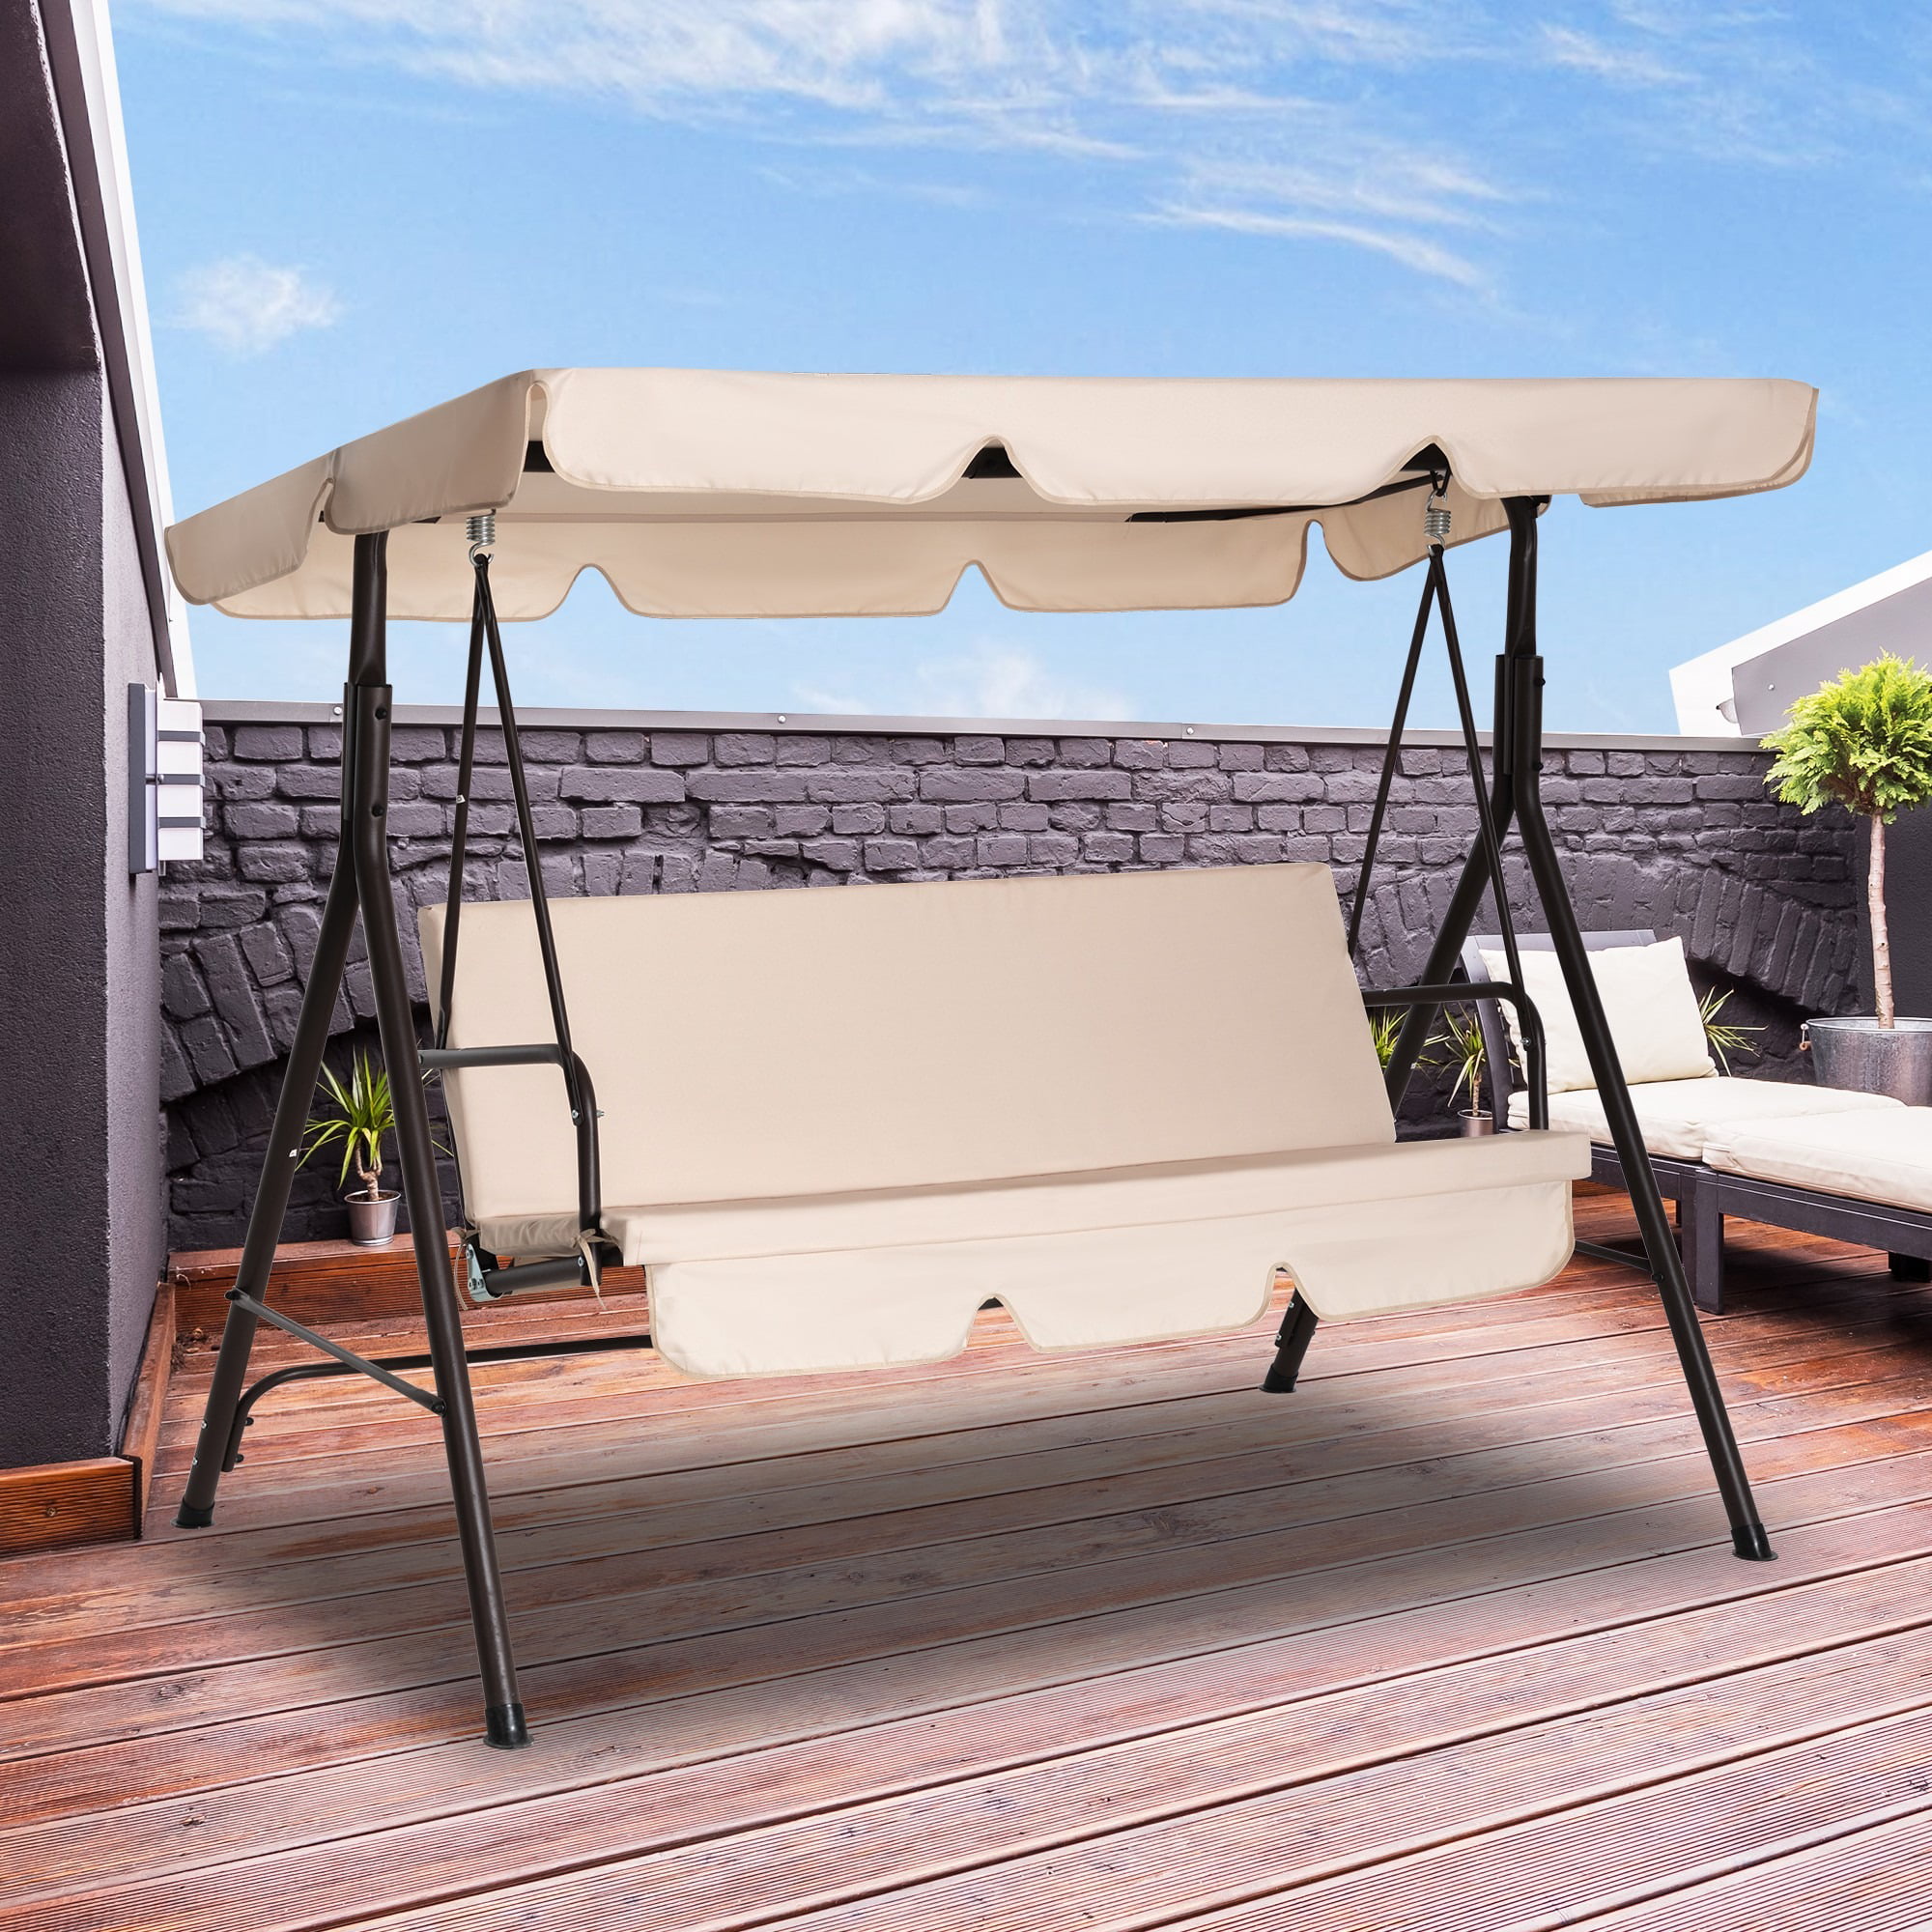 Details about   Outdoor 3-Seater Patio Porch Swing Chair Canopy Adjustable and Cushion Included 